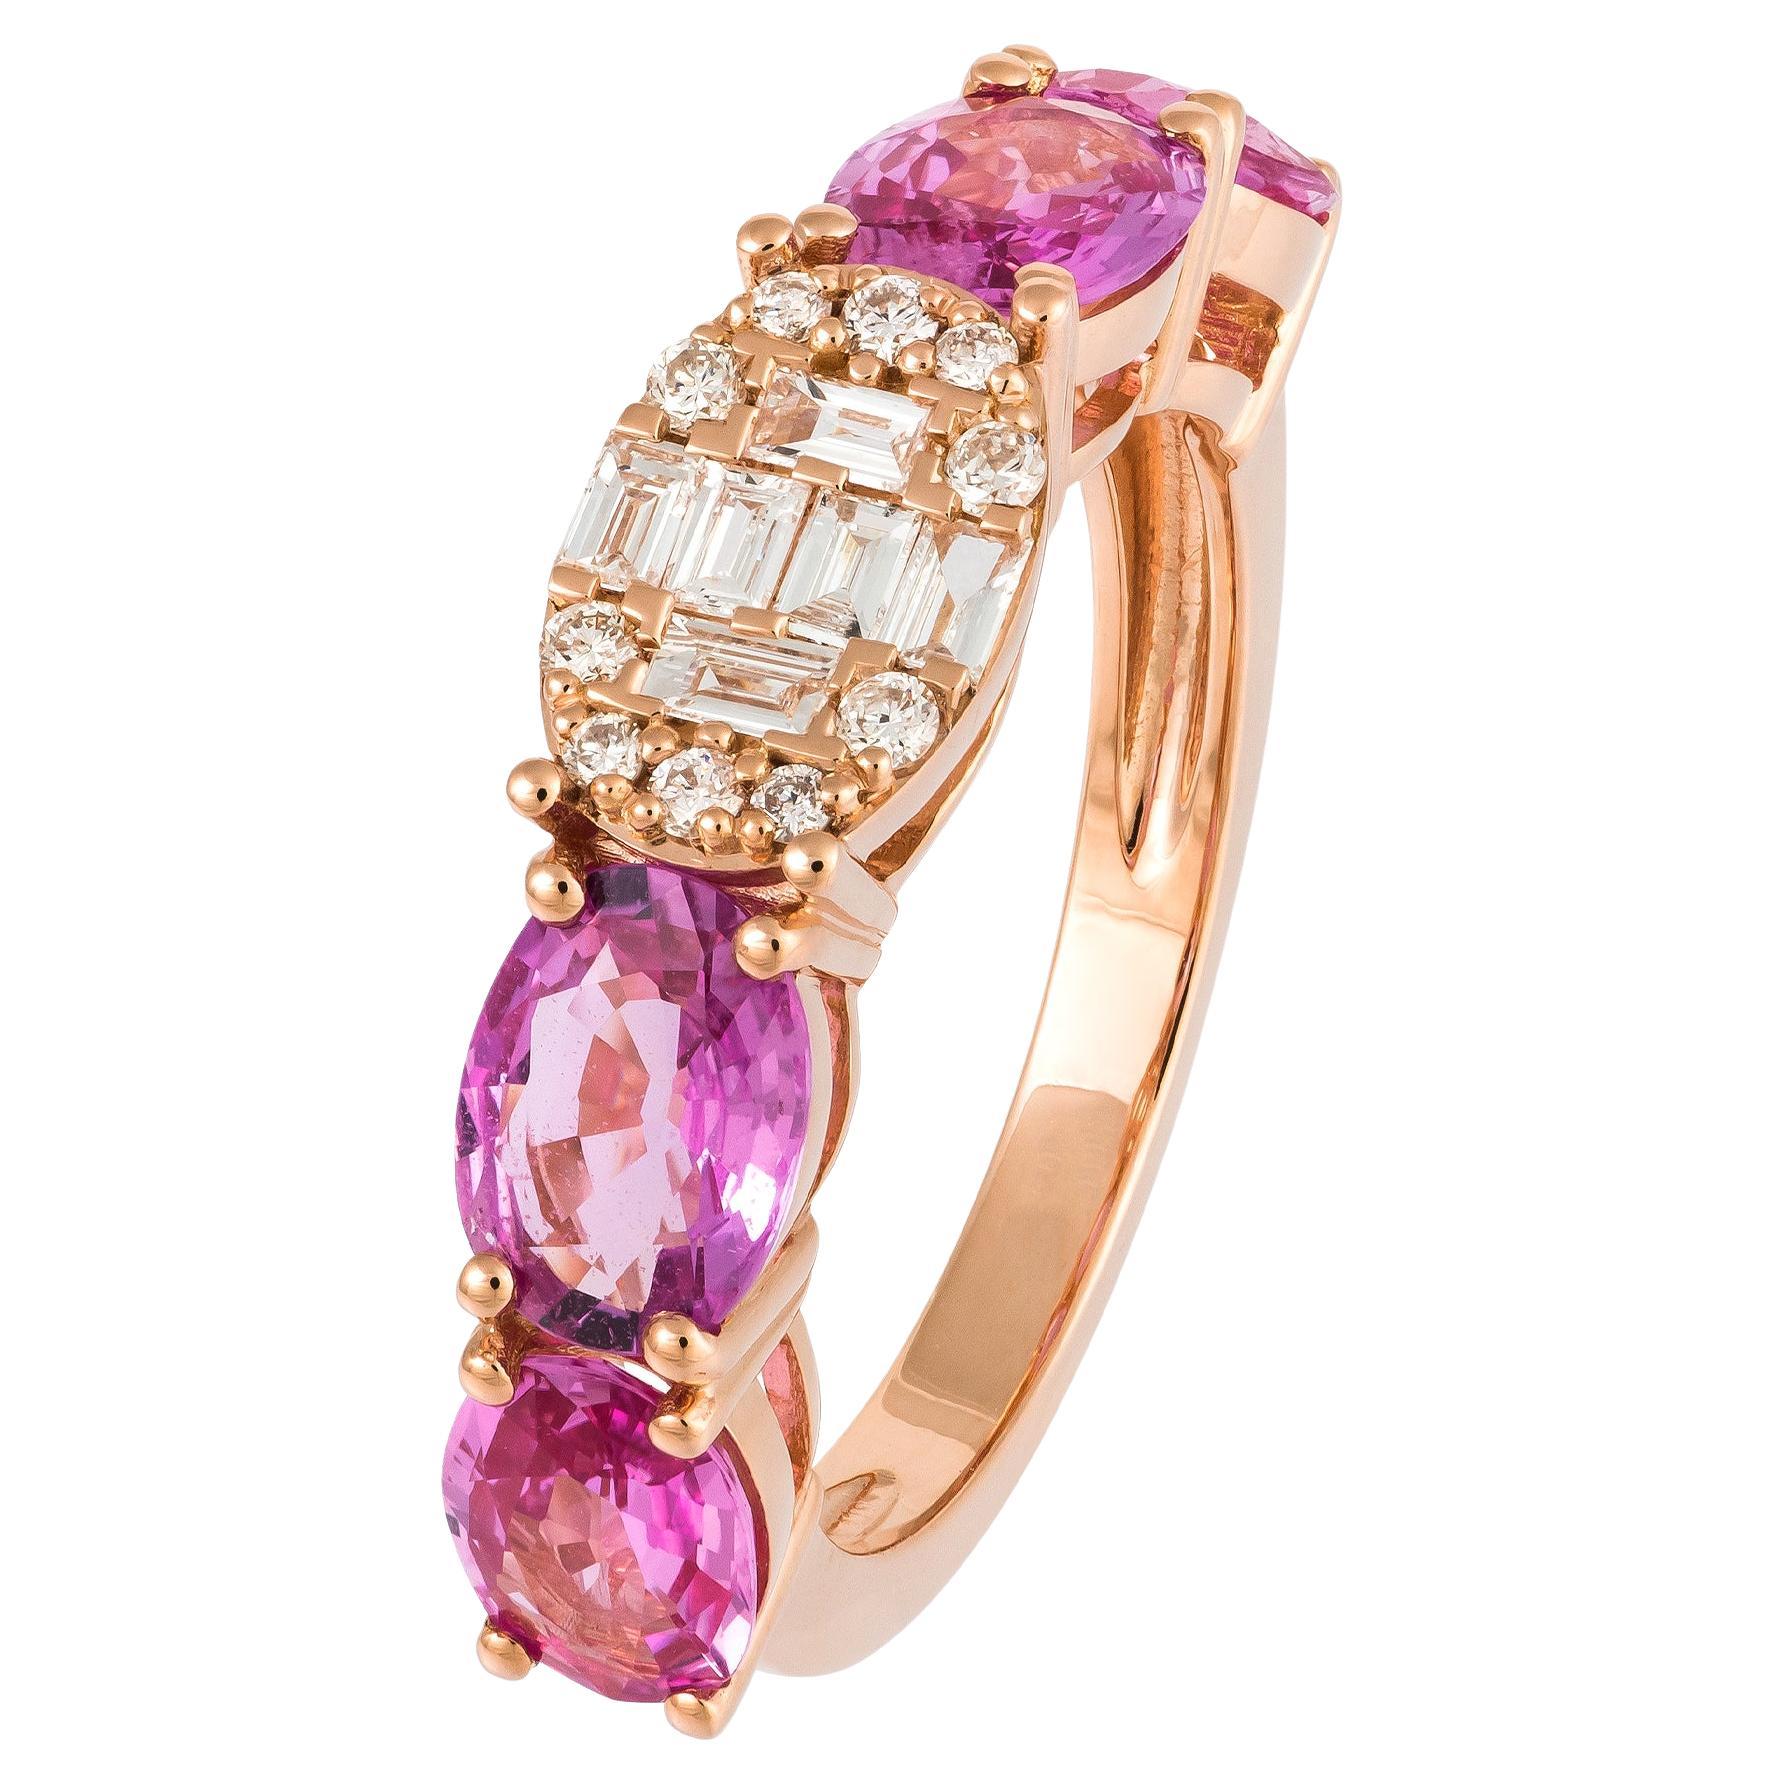 Breathtaking Pink 18K Gold Pink Sapphire Diamond Ring For Her